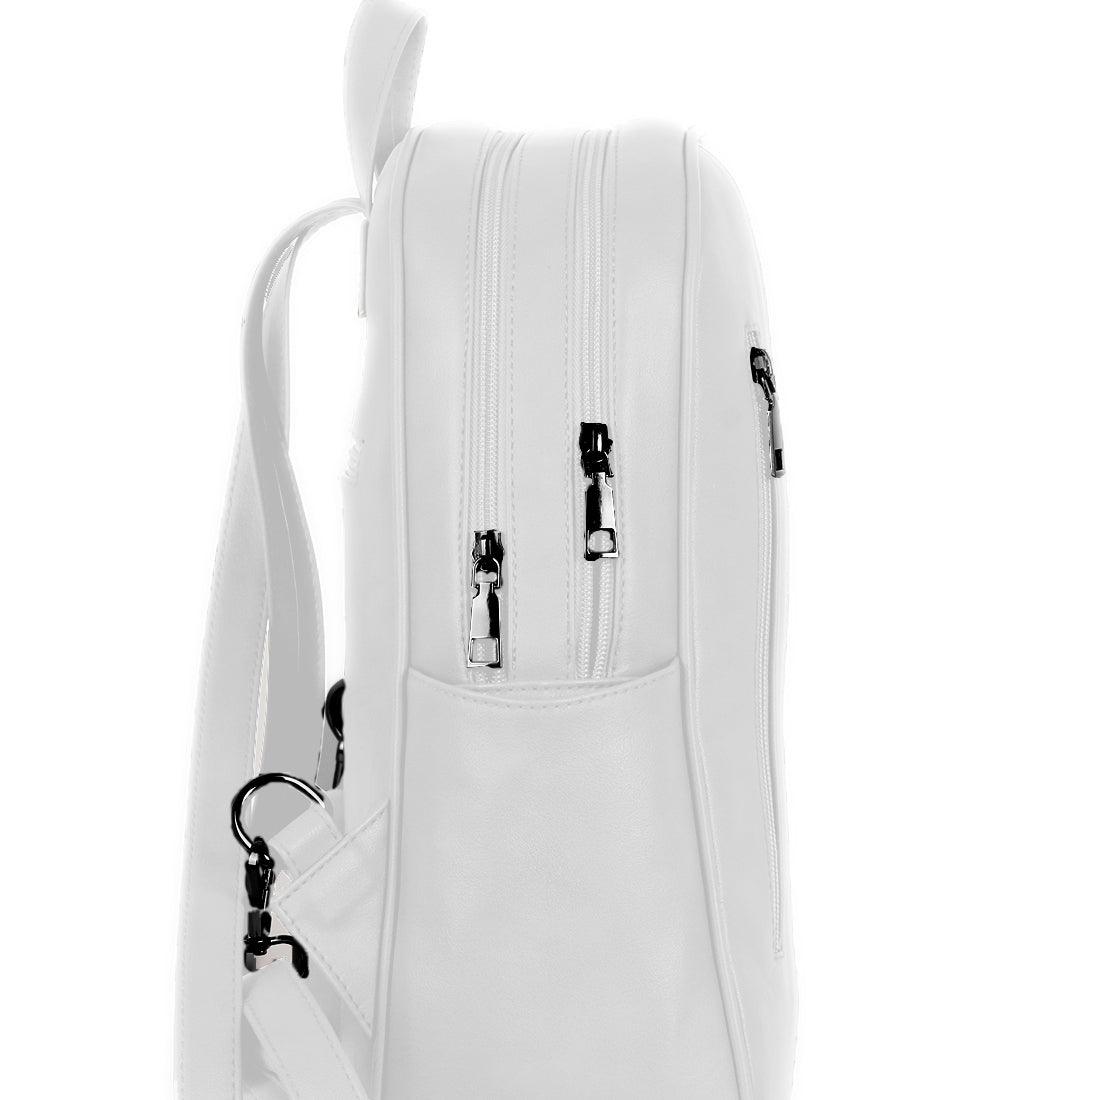 White Mixed Backpack African Spotted - CANVAEGYPT